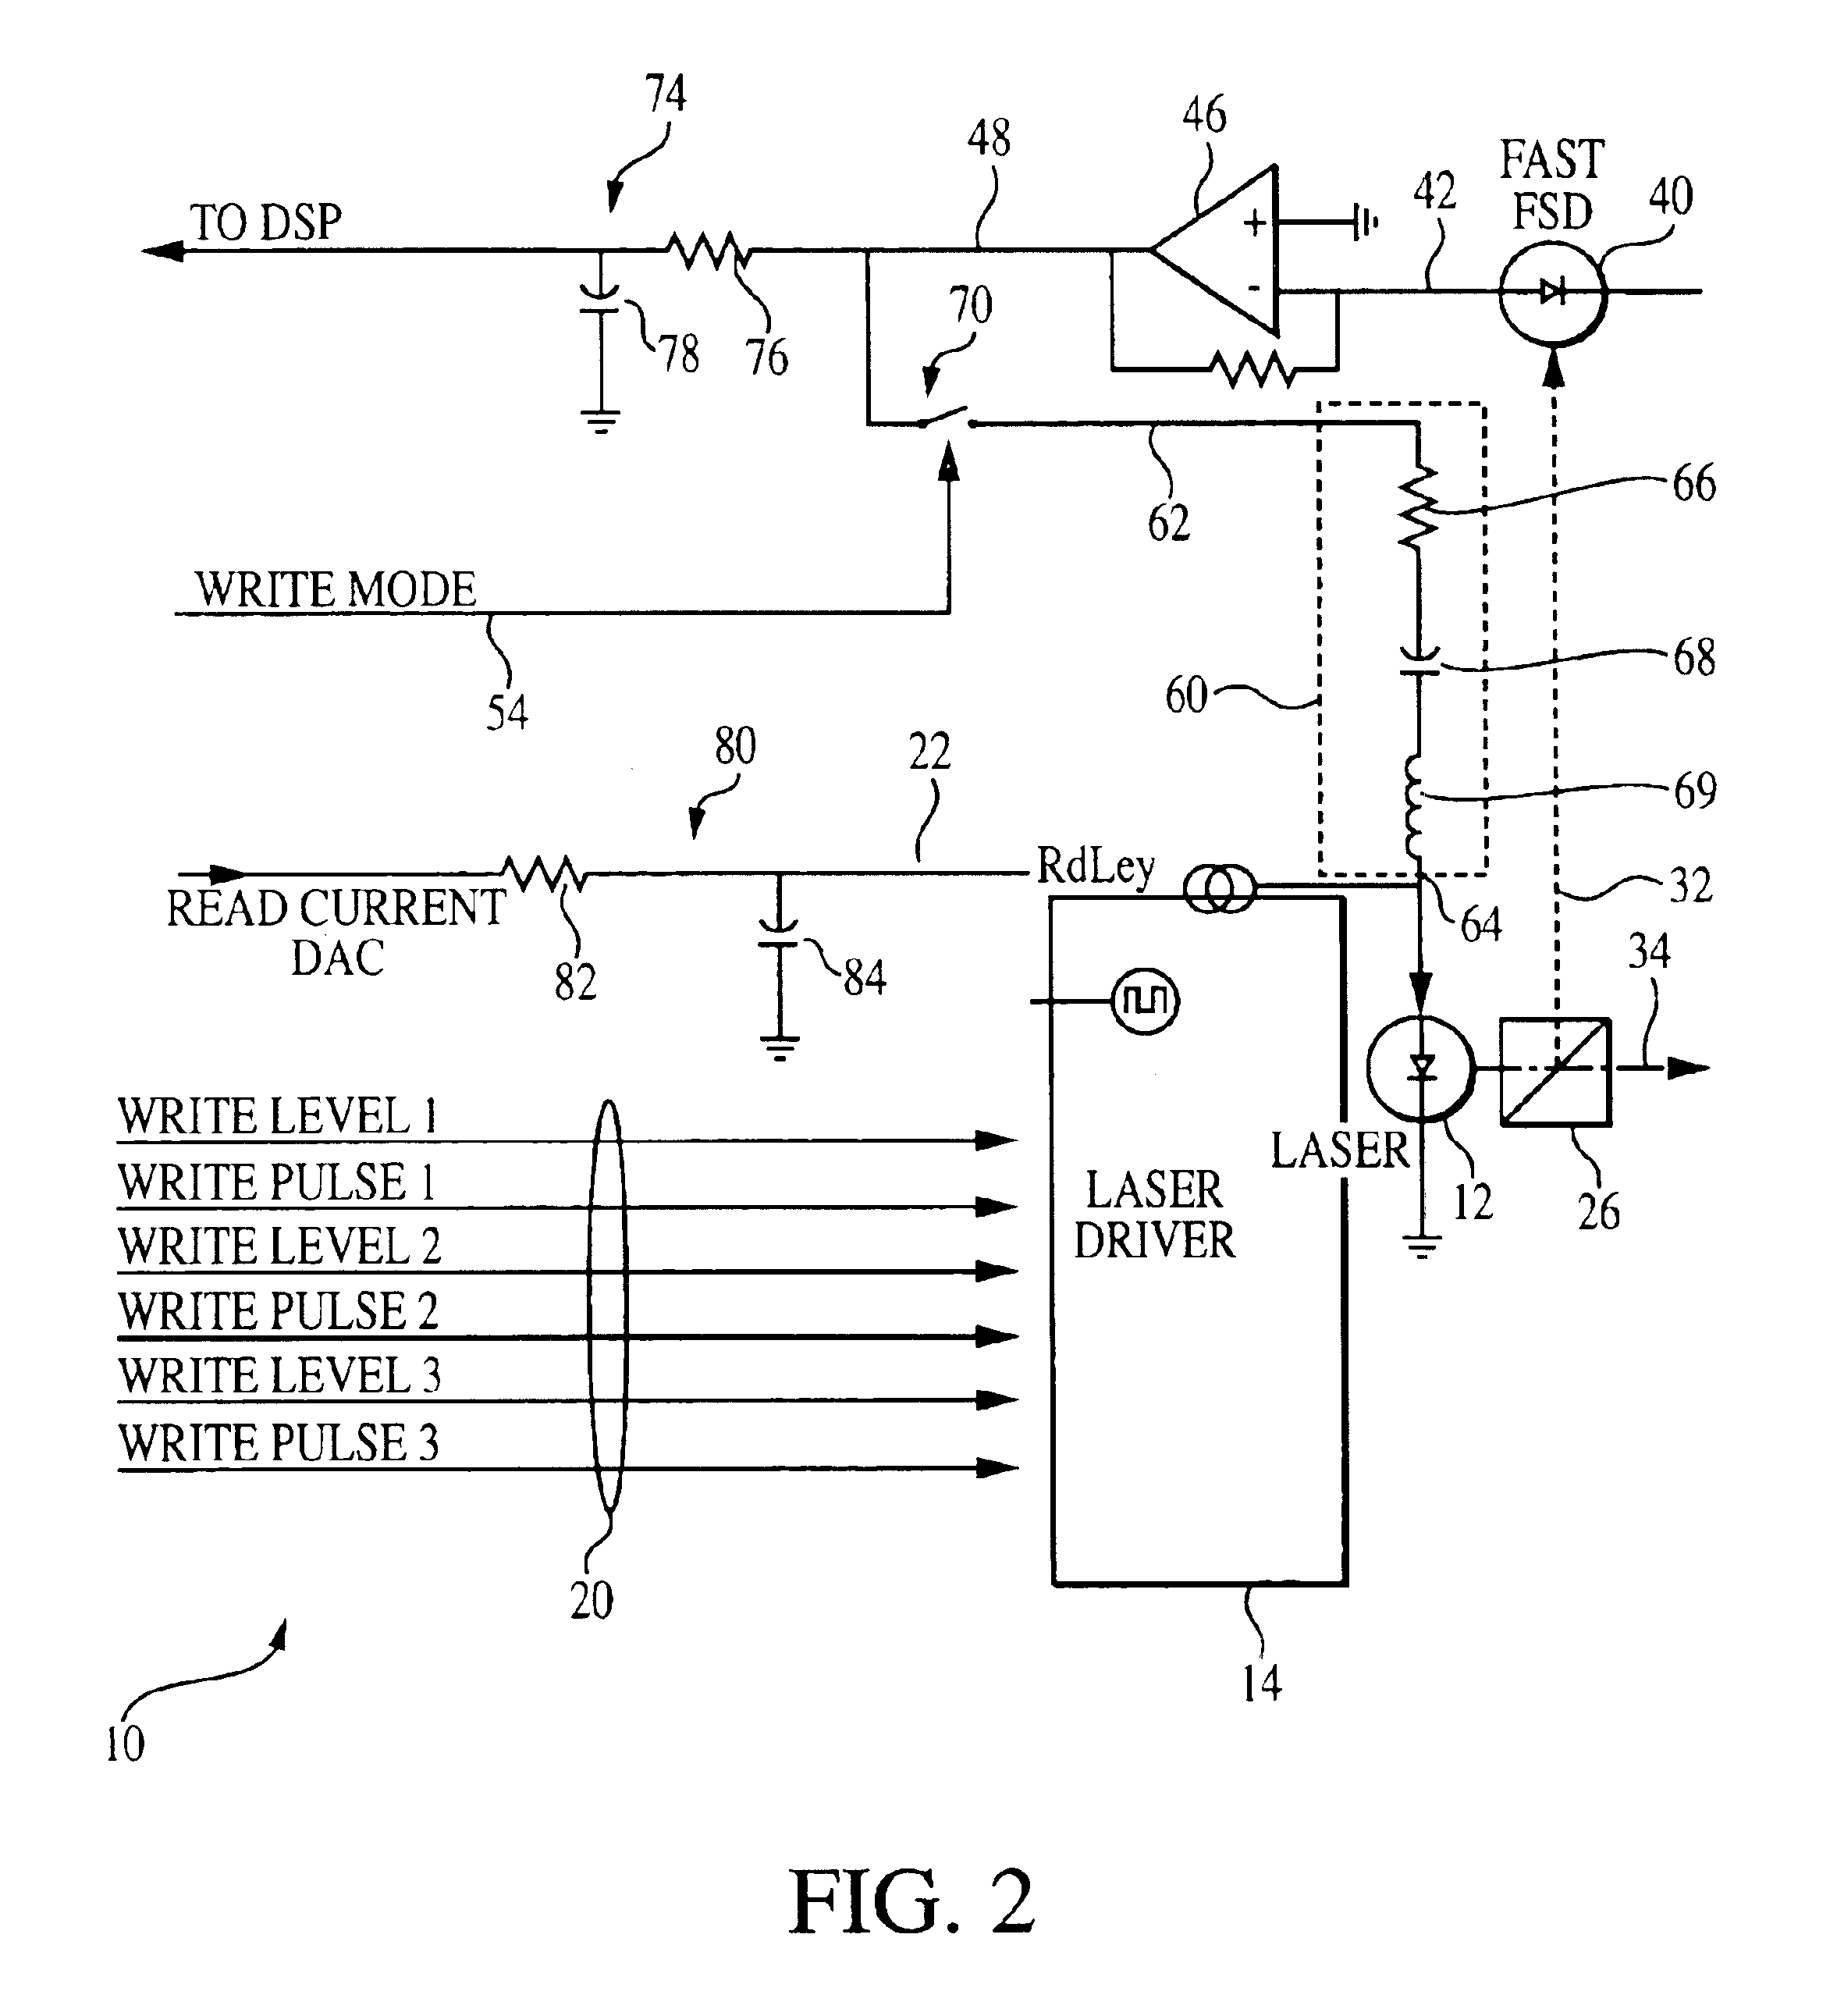 Laser driver with noise reduction feedback for optical storage applications